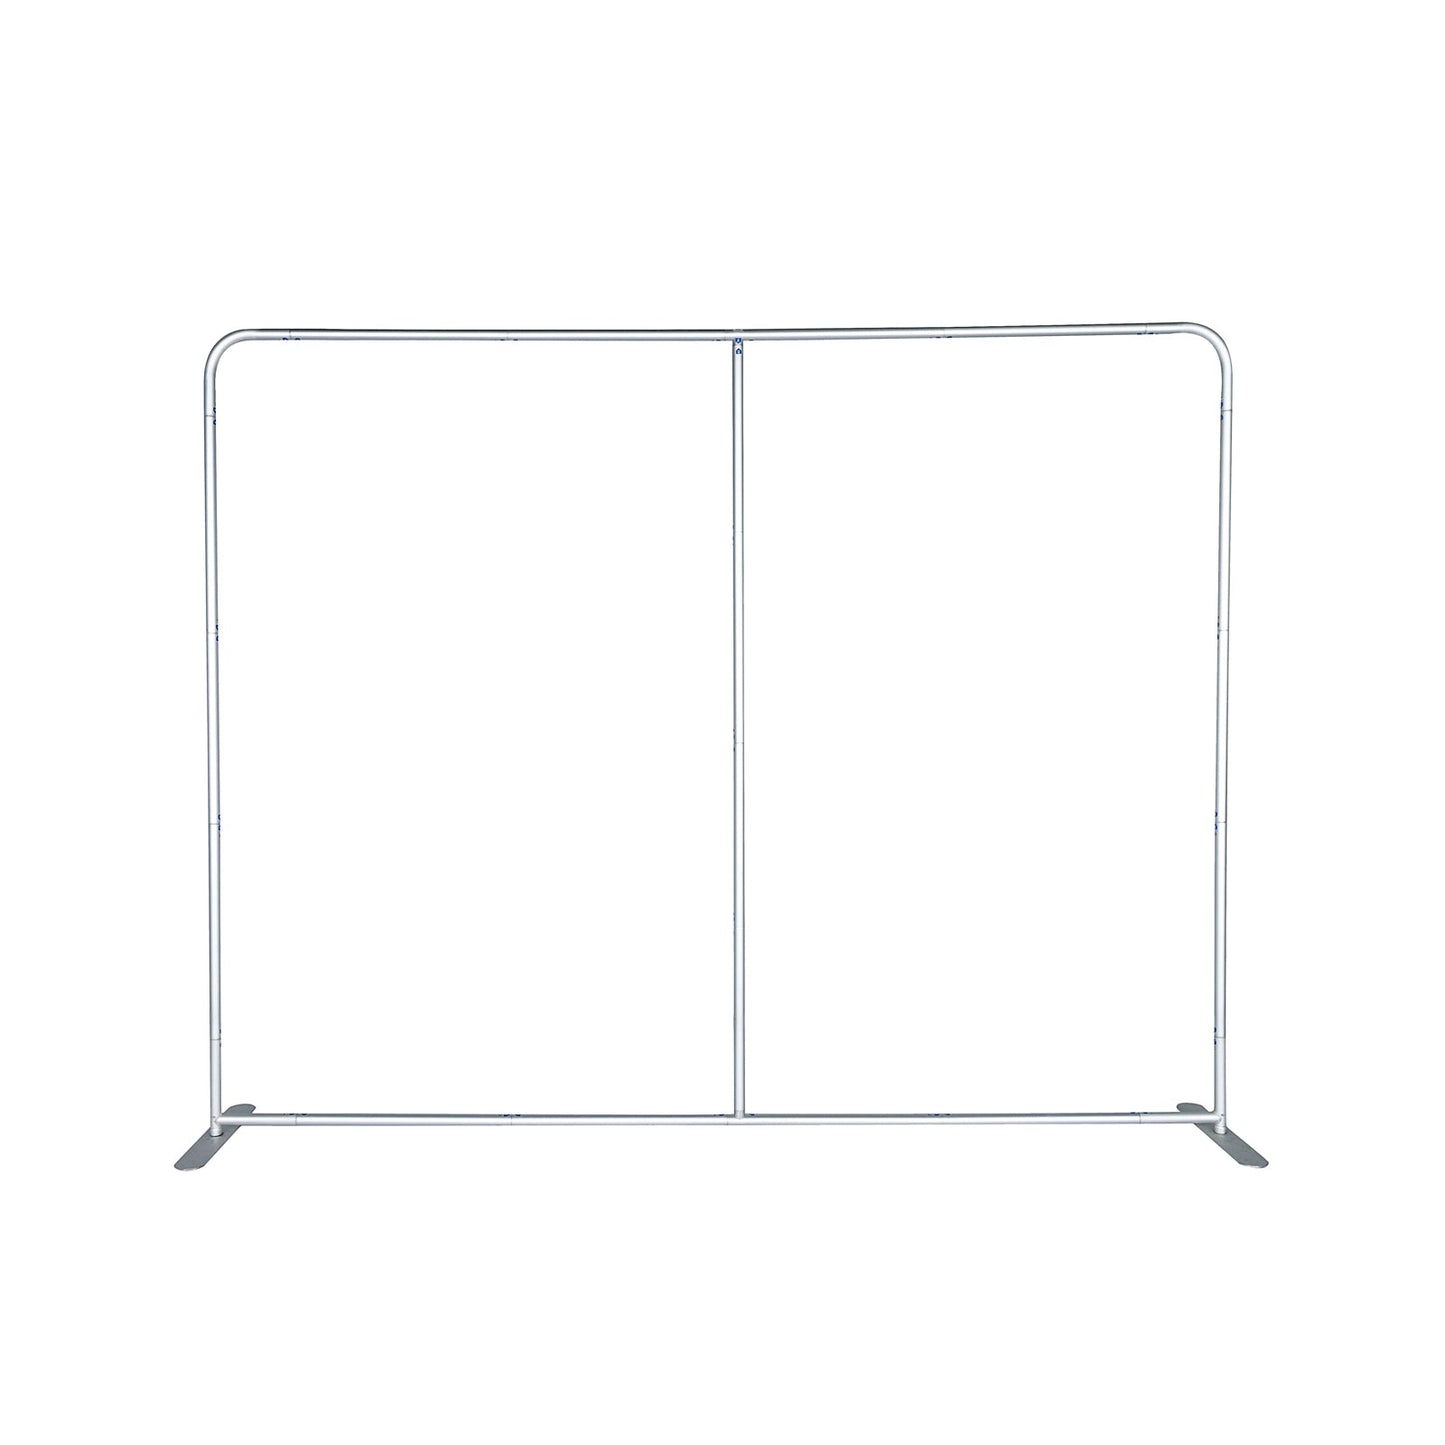 4000mm Fabric Display Stand - Straight